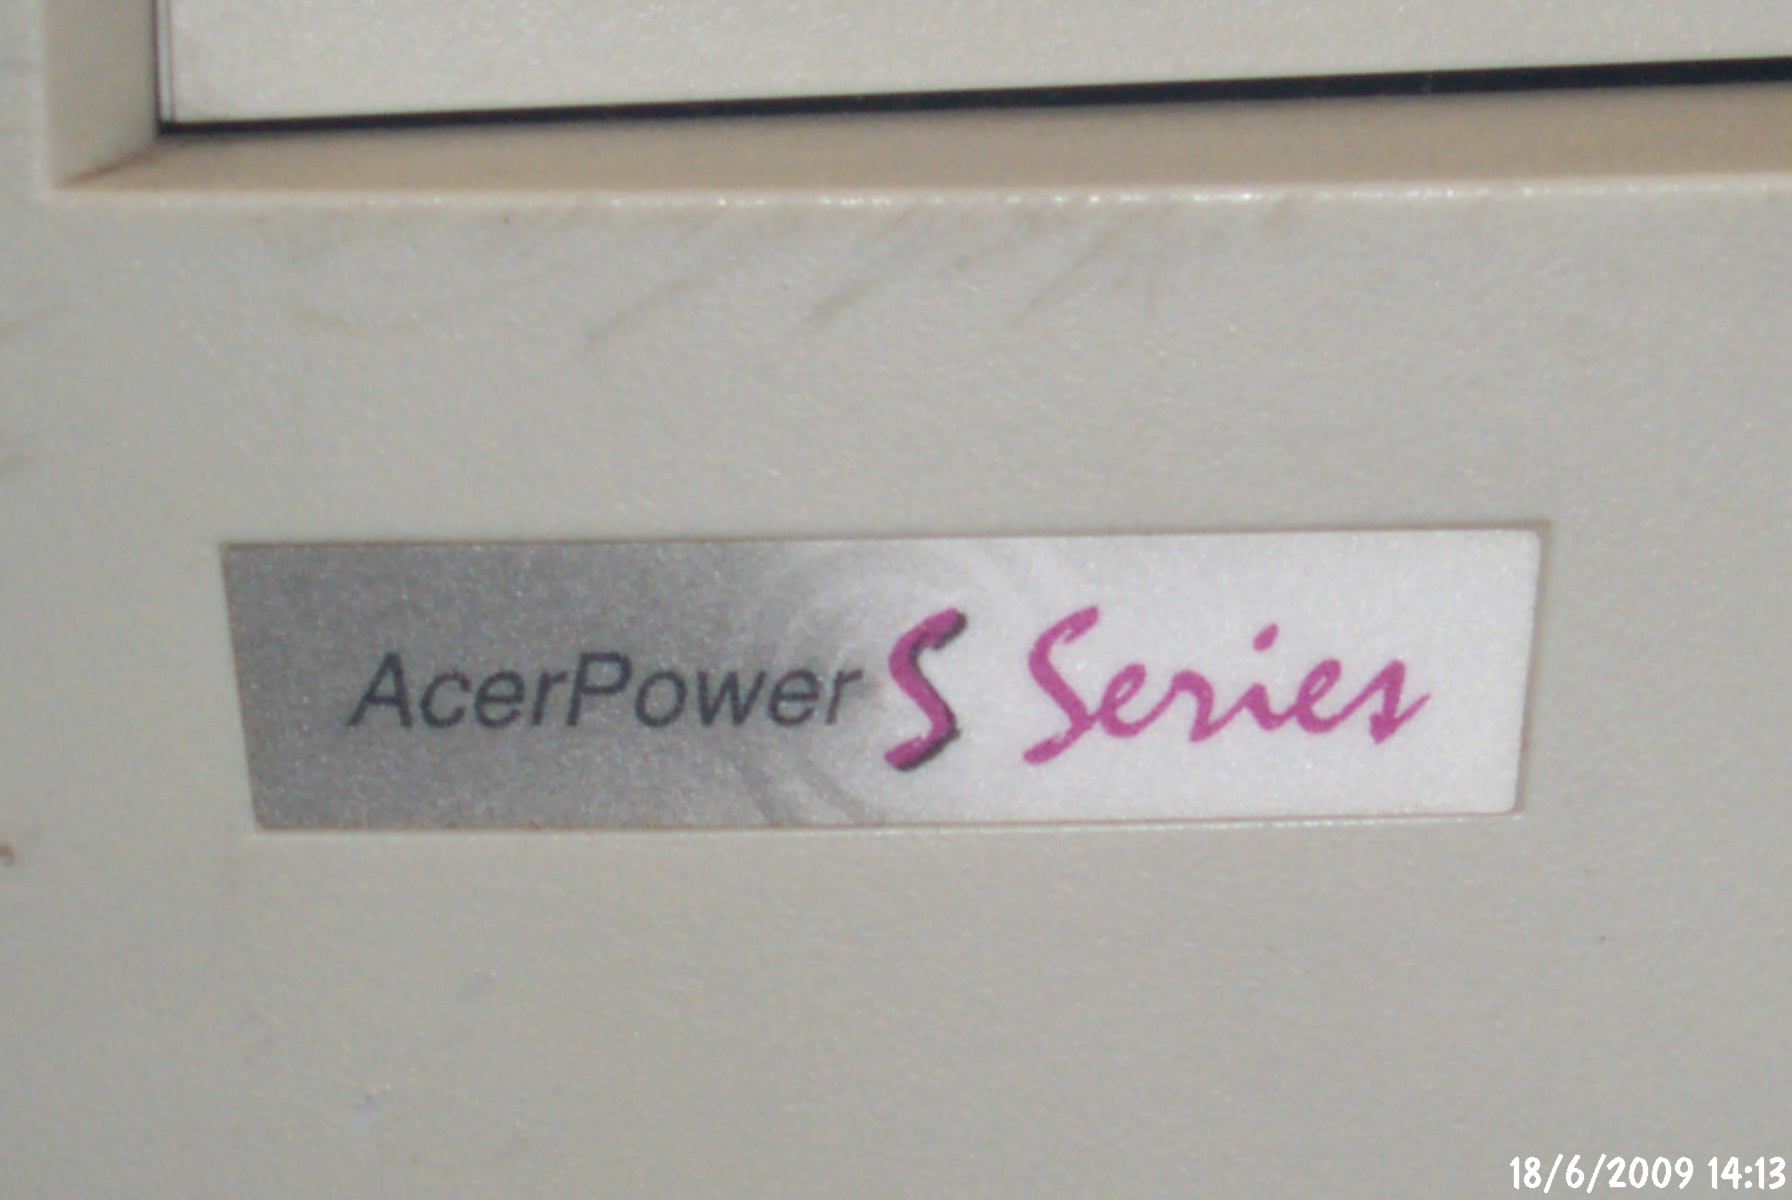 http://museodelcomputer.org/parts/acer/APSX6F/P0030302.JPG